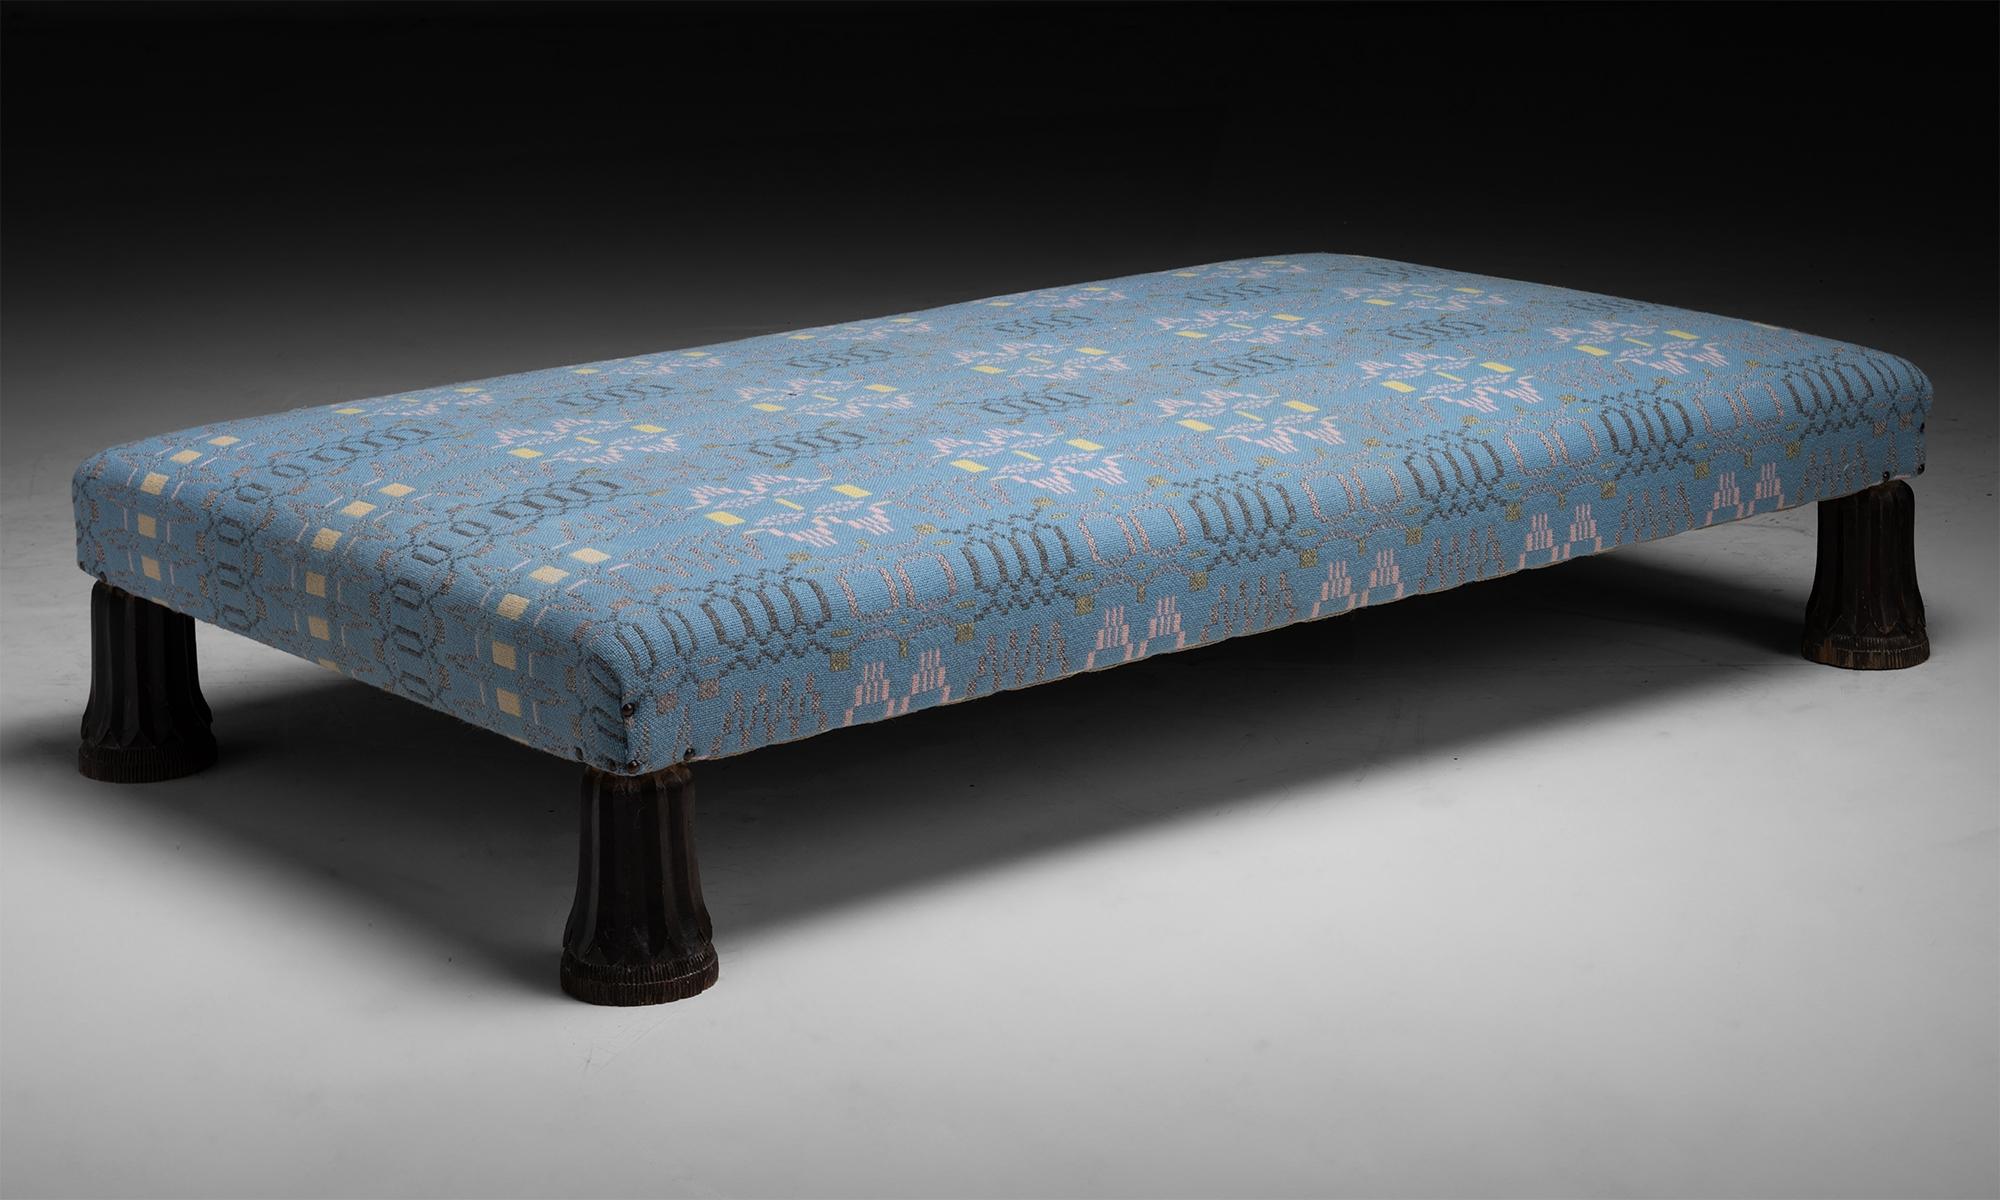 Welsh Blanket Ottoman
England circa 1900
Newly upholstered in a welsh blanket, on 18th century Indian Lotus Leaf carved feet.
59